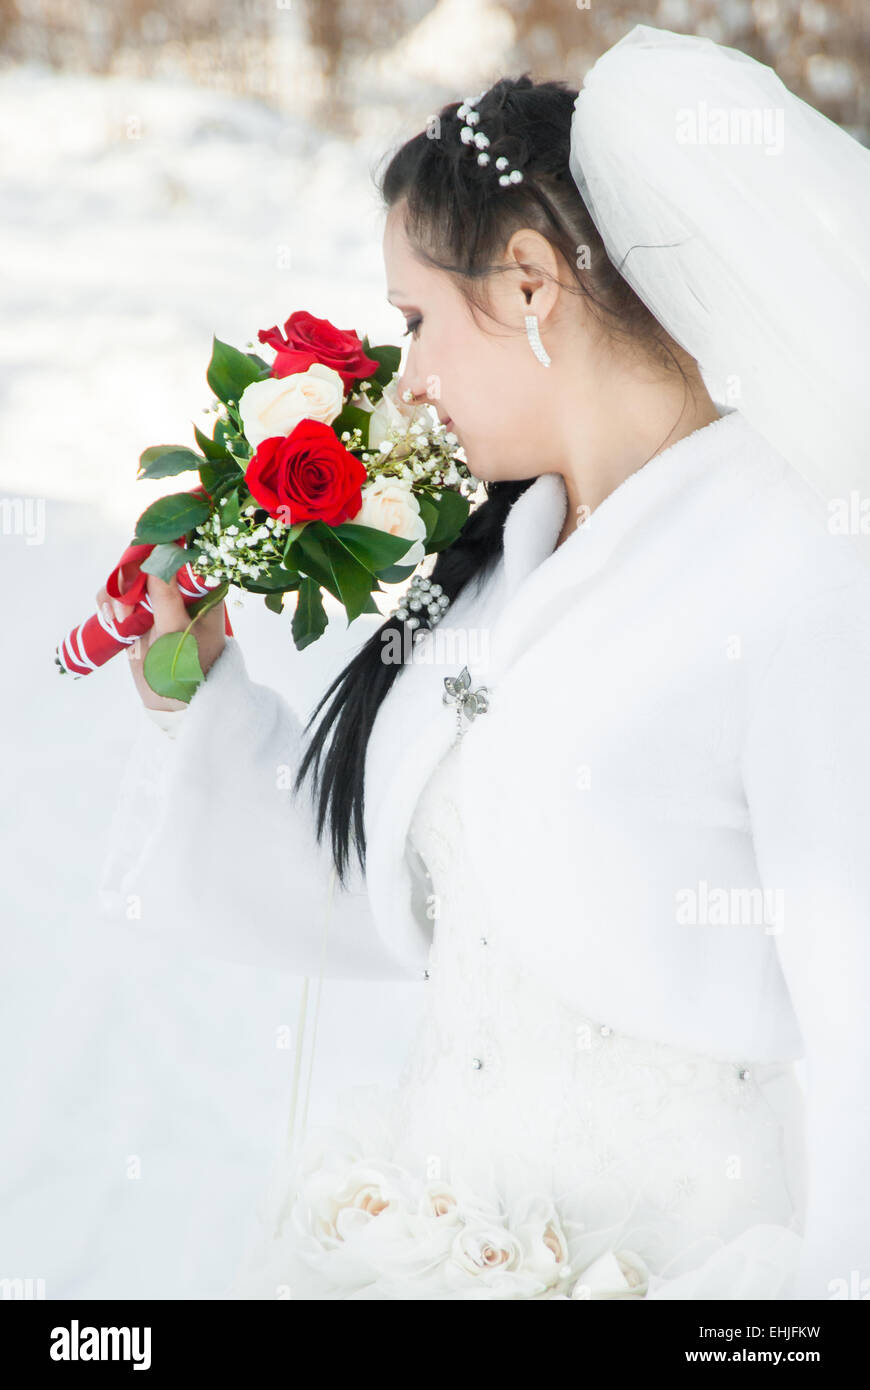 Portrait of the bride with a bunch of flowers, in a wedding dress Stock Photo